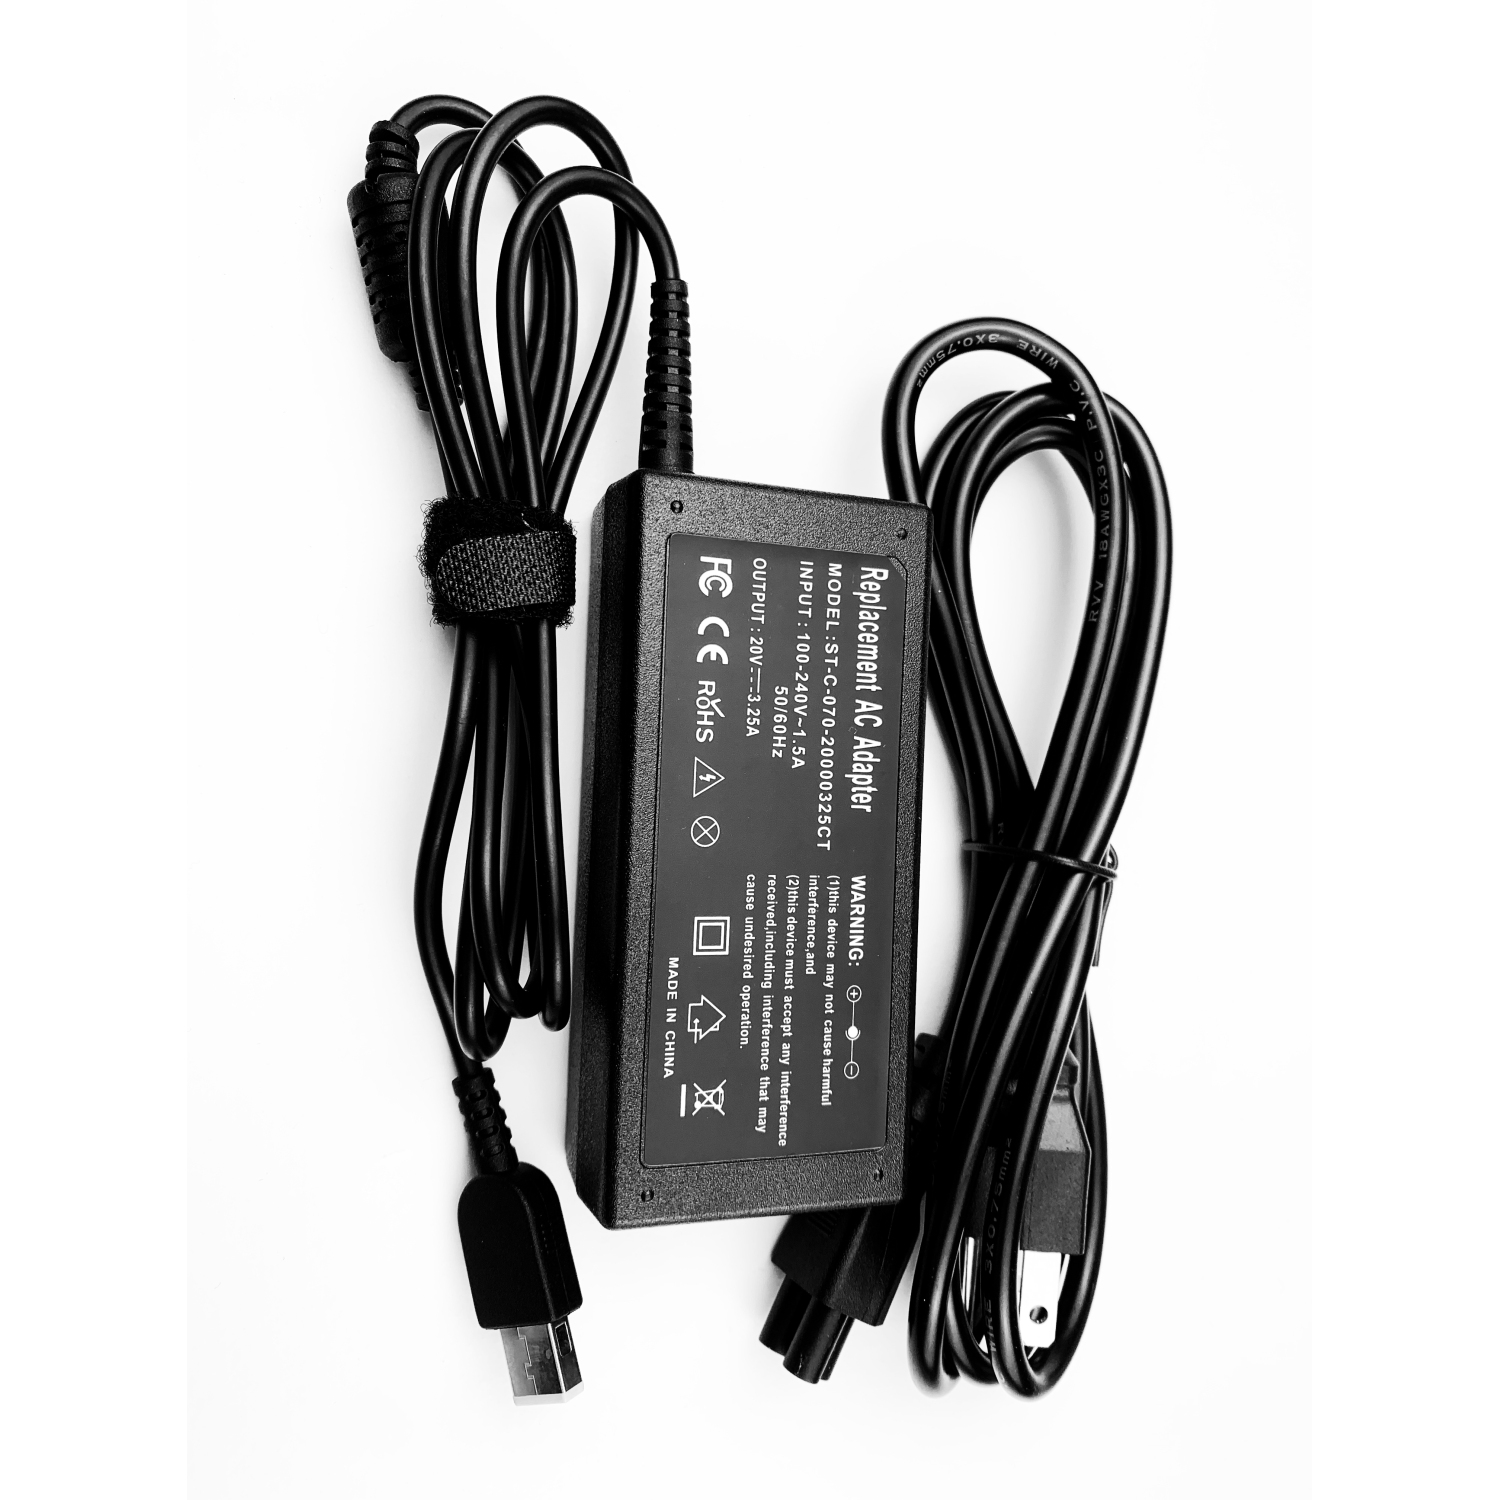 20V 3.25A yellow square tip 65W AC adapter power cord charger for Lenovo P/N 36200610 Yoga Tablet 2 13""